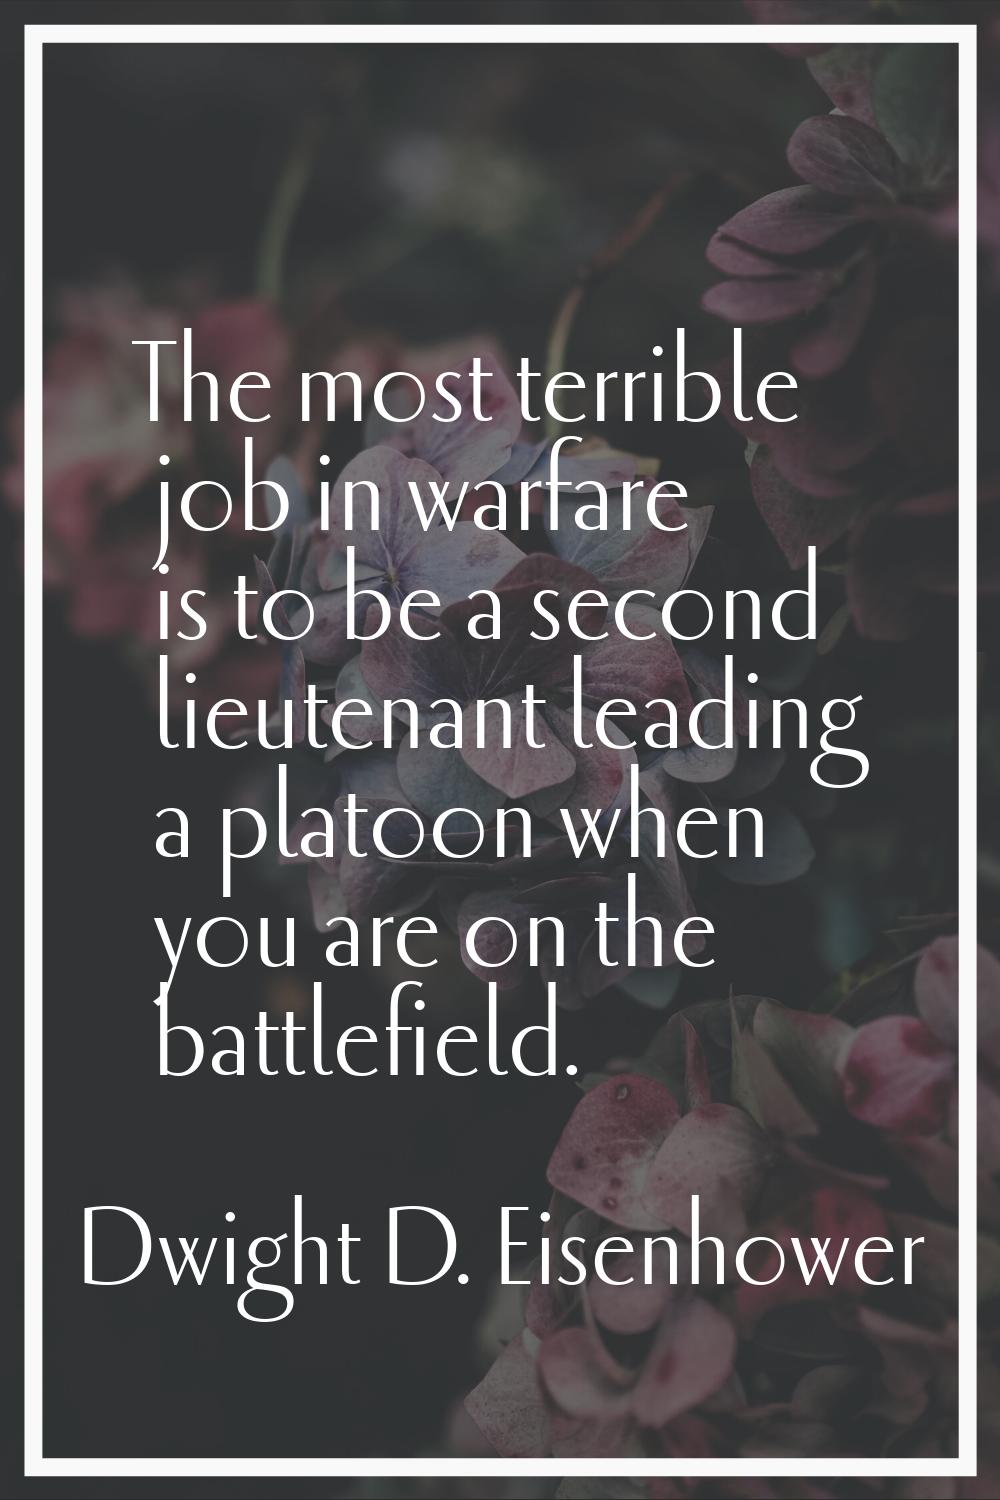 The most terrible job in warfare is to be a second lieutenant leading a platoon when you are on the